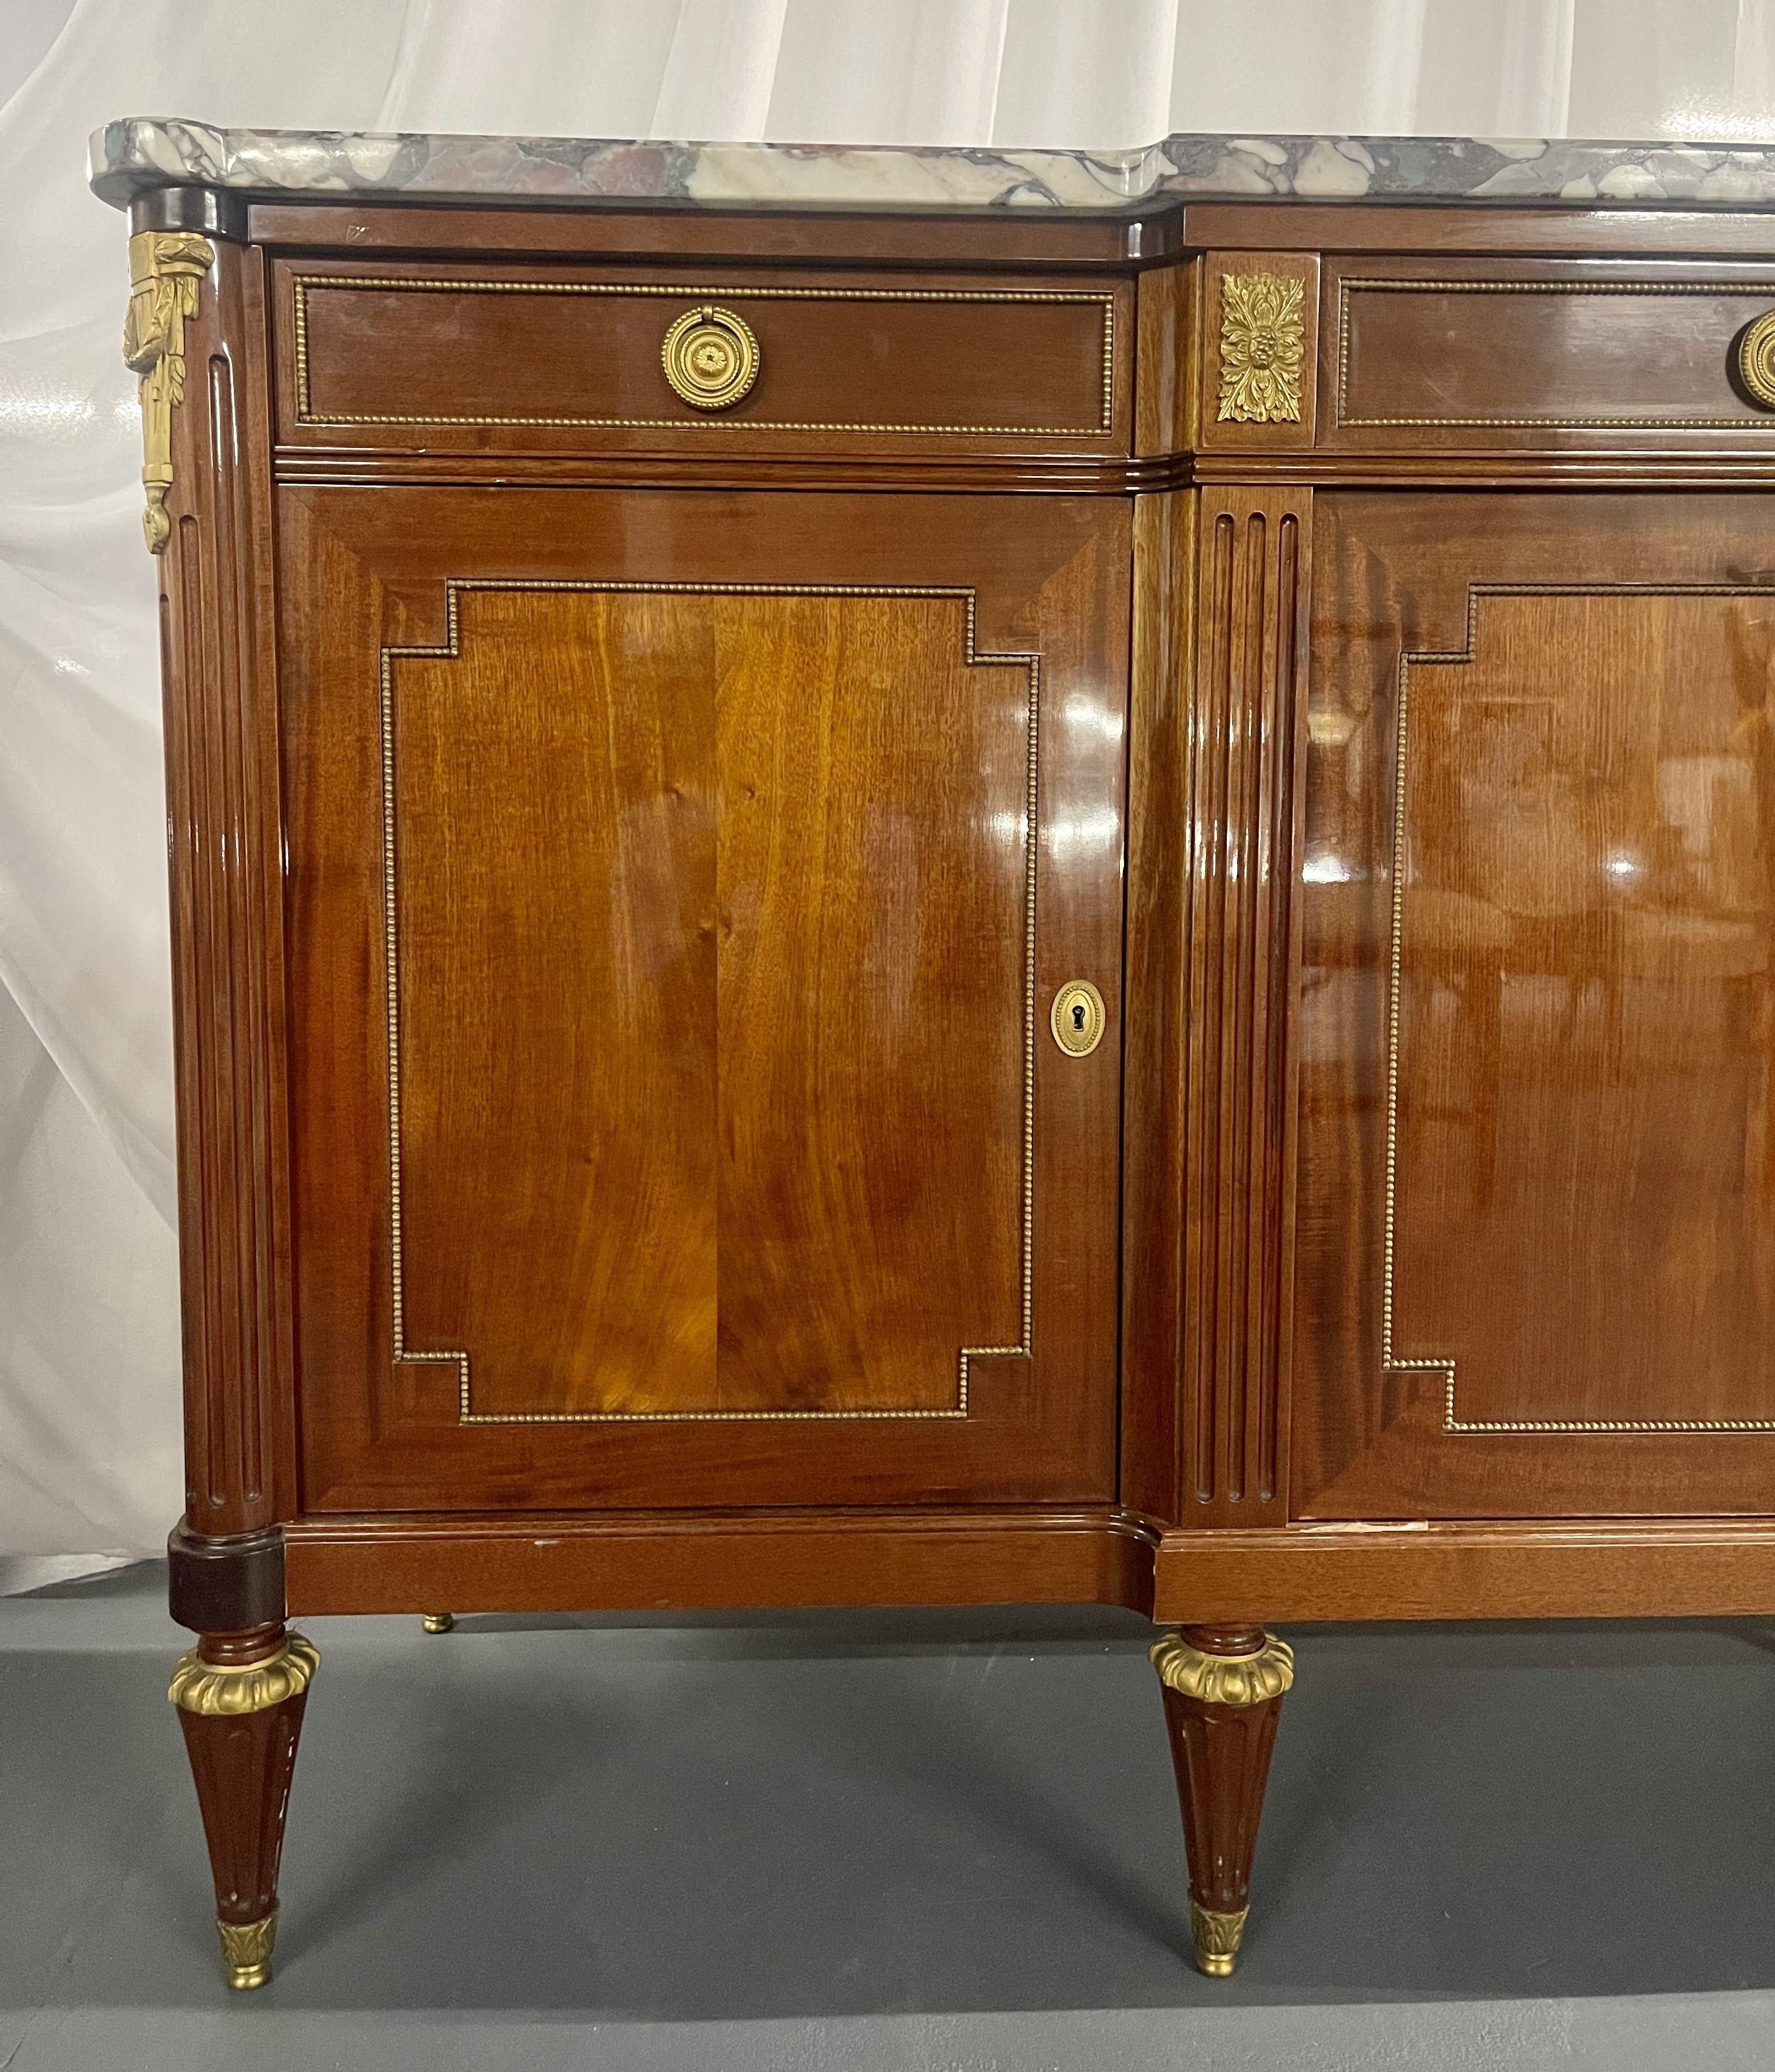 Maison Jansen Louis XVI Style Sideboard, Cabinet, Credenza, Bronze, Marble Top In Good Condition For Sale In Stamford, CT